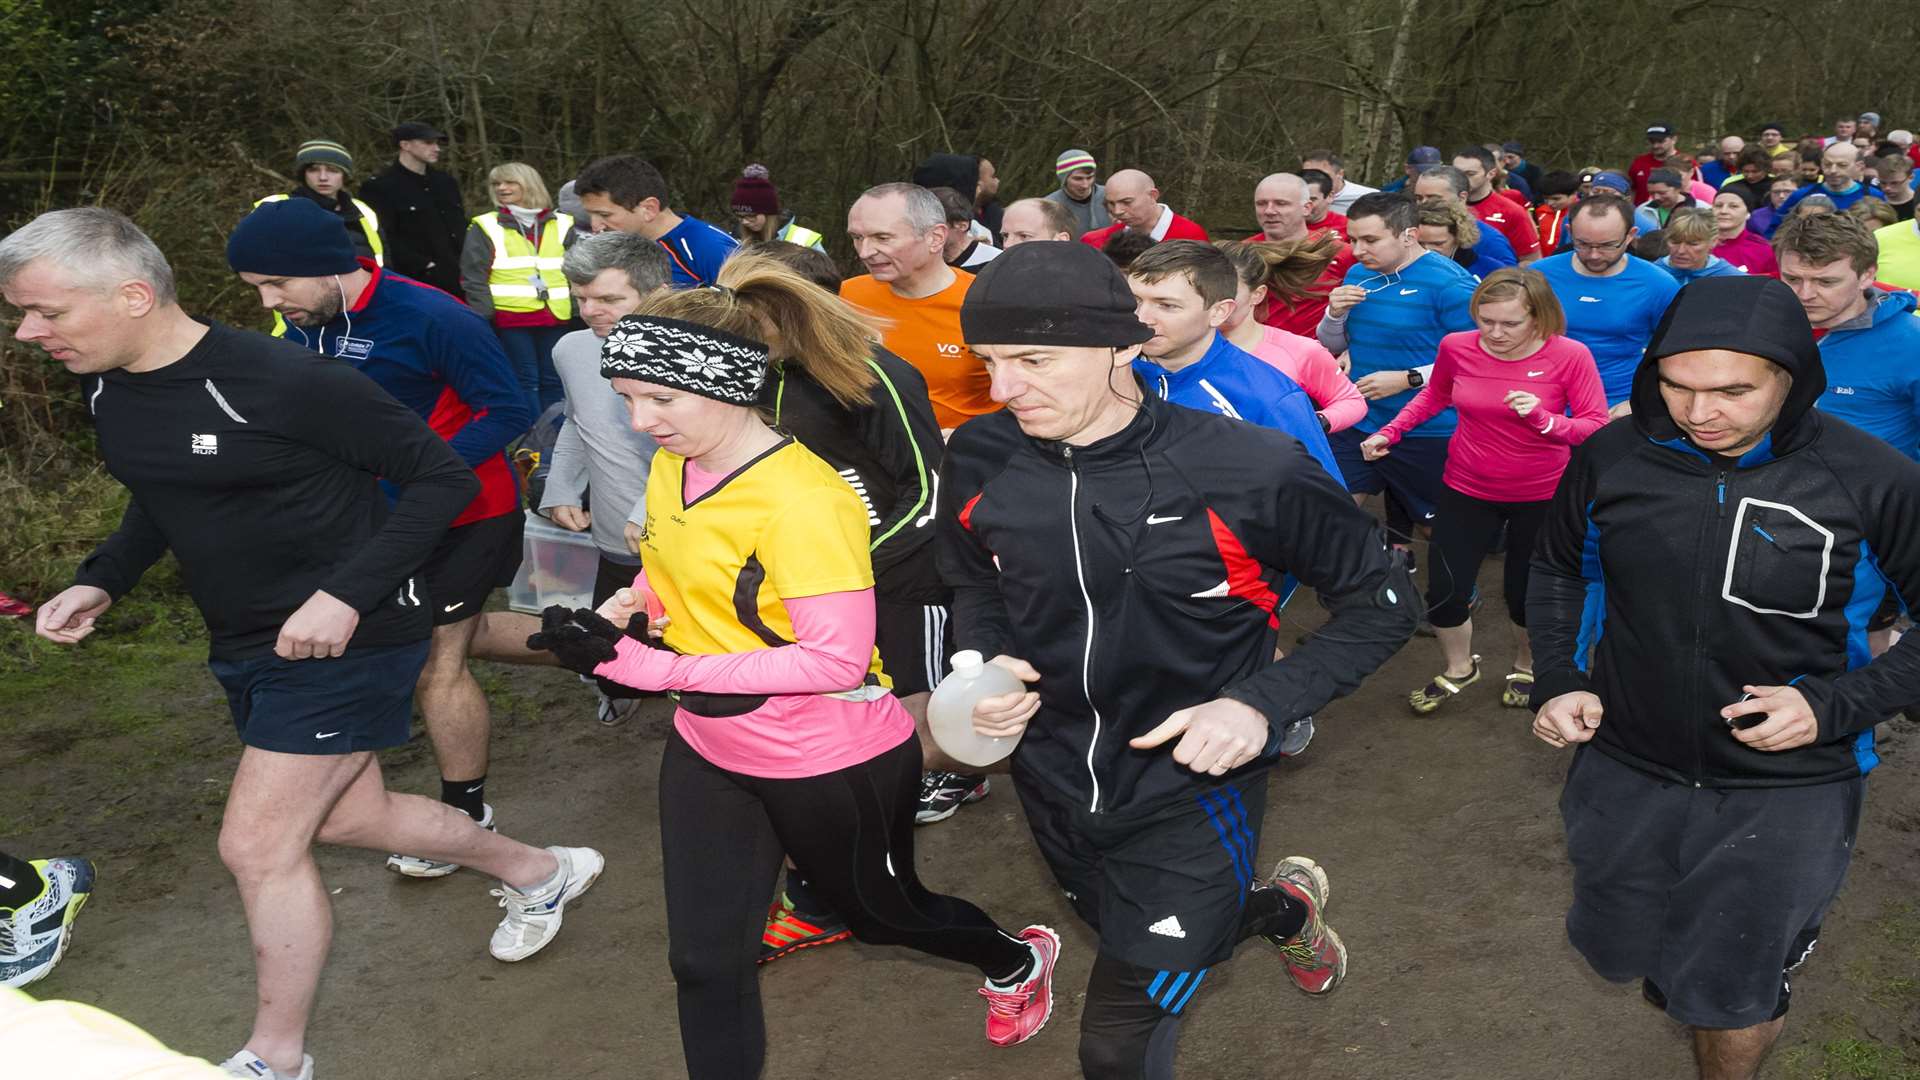 Runners will be completing a 3.1mile run before settling down for Christmas dinner.